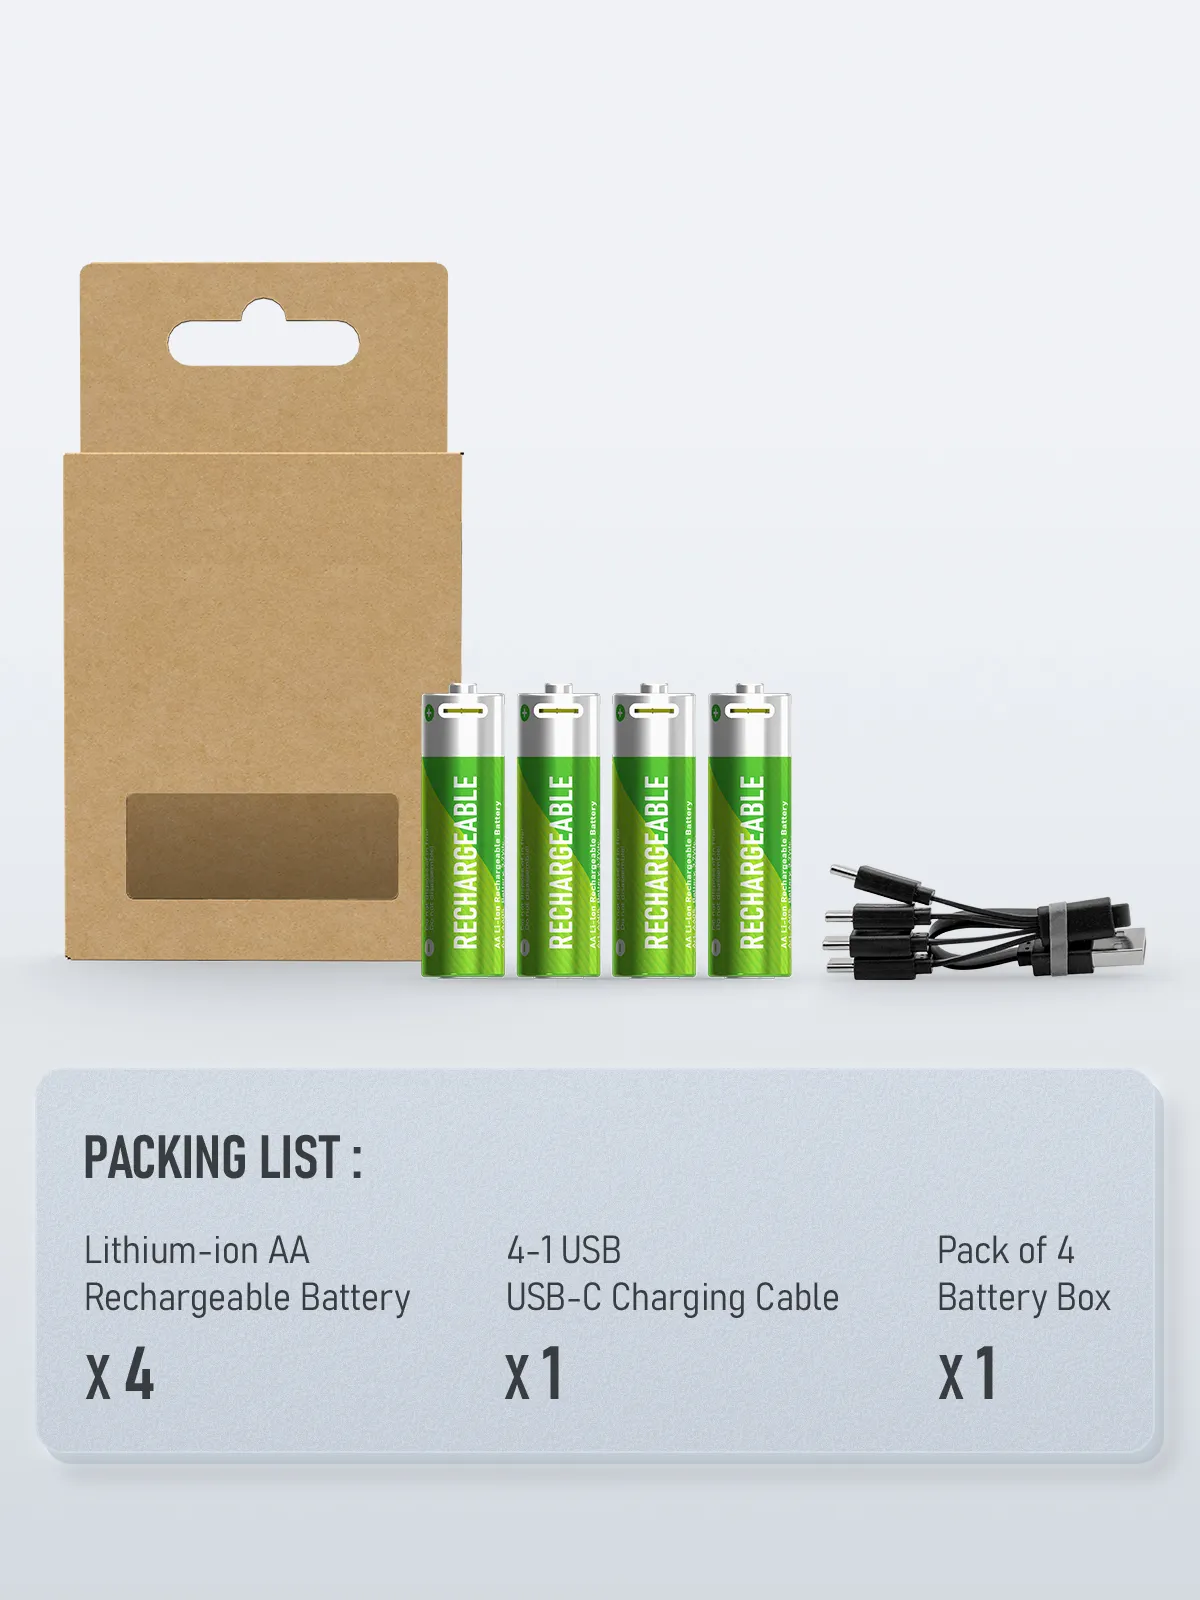 Oem Safety 1000+ Cycles Times Life 1.5v 2550mwh Type C Port Usb Aa Lithium Rechargeable Battery